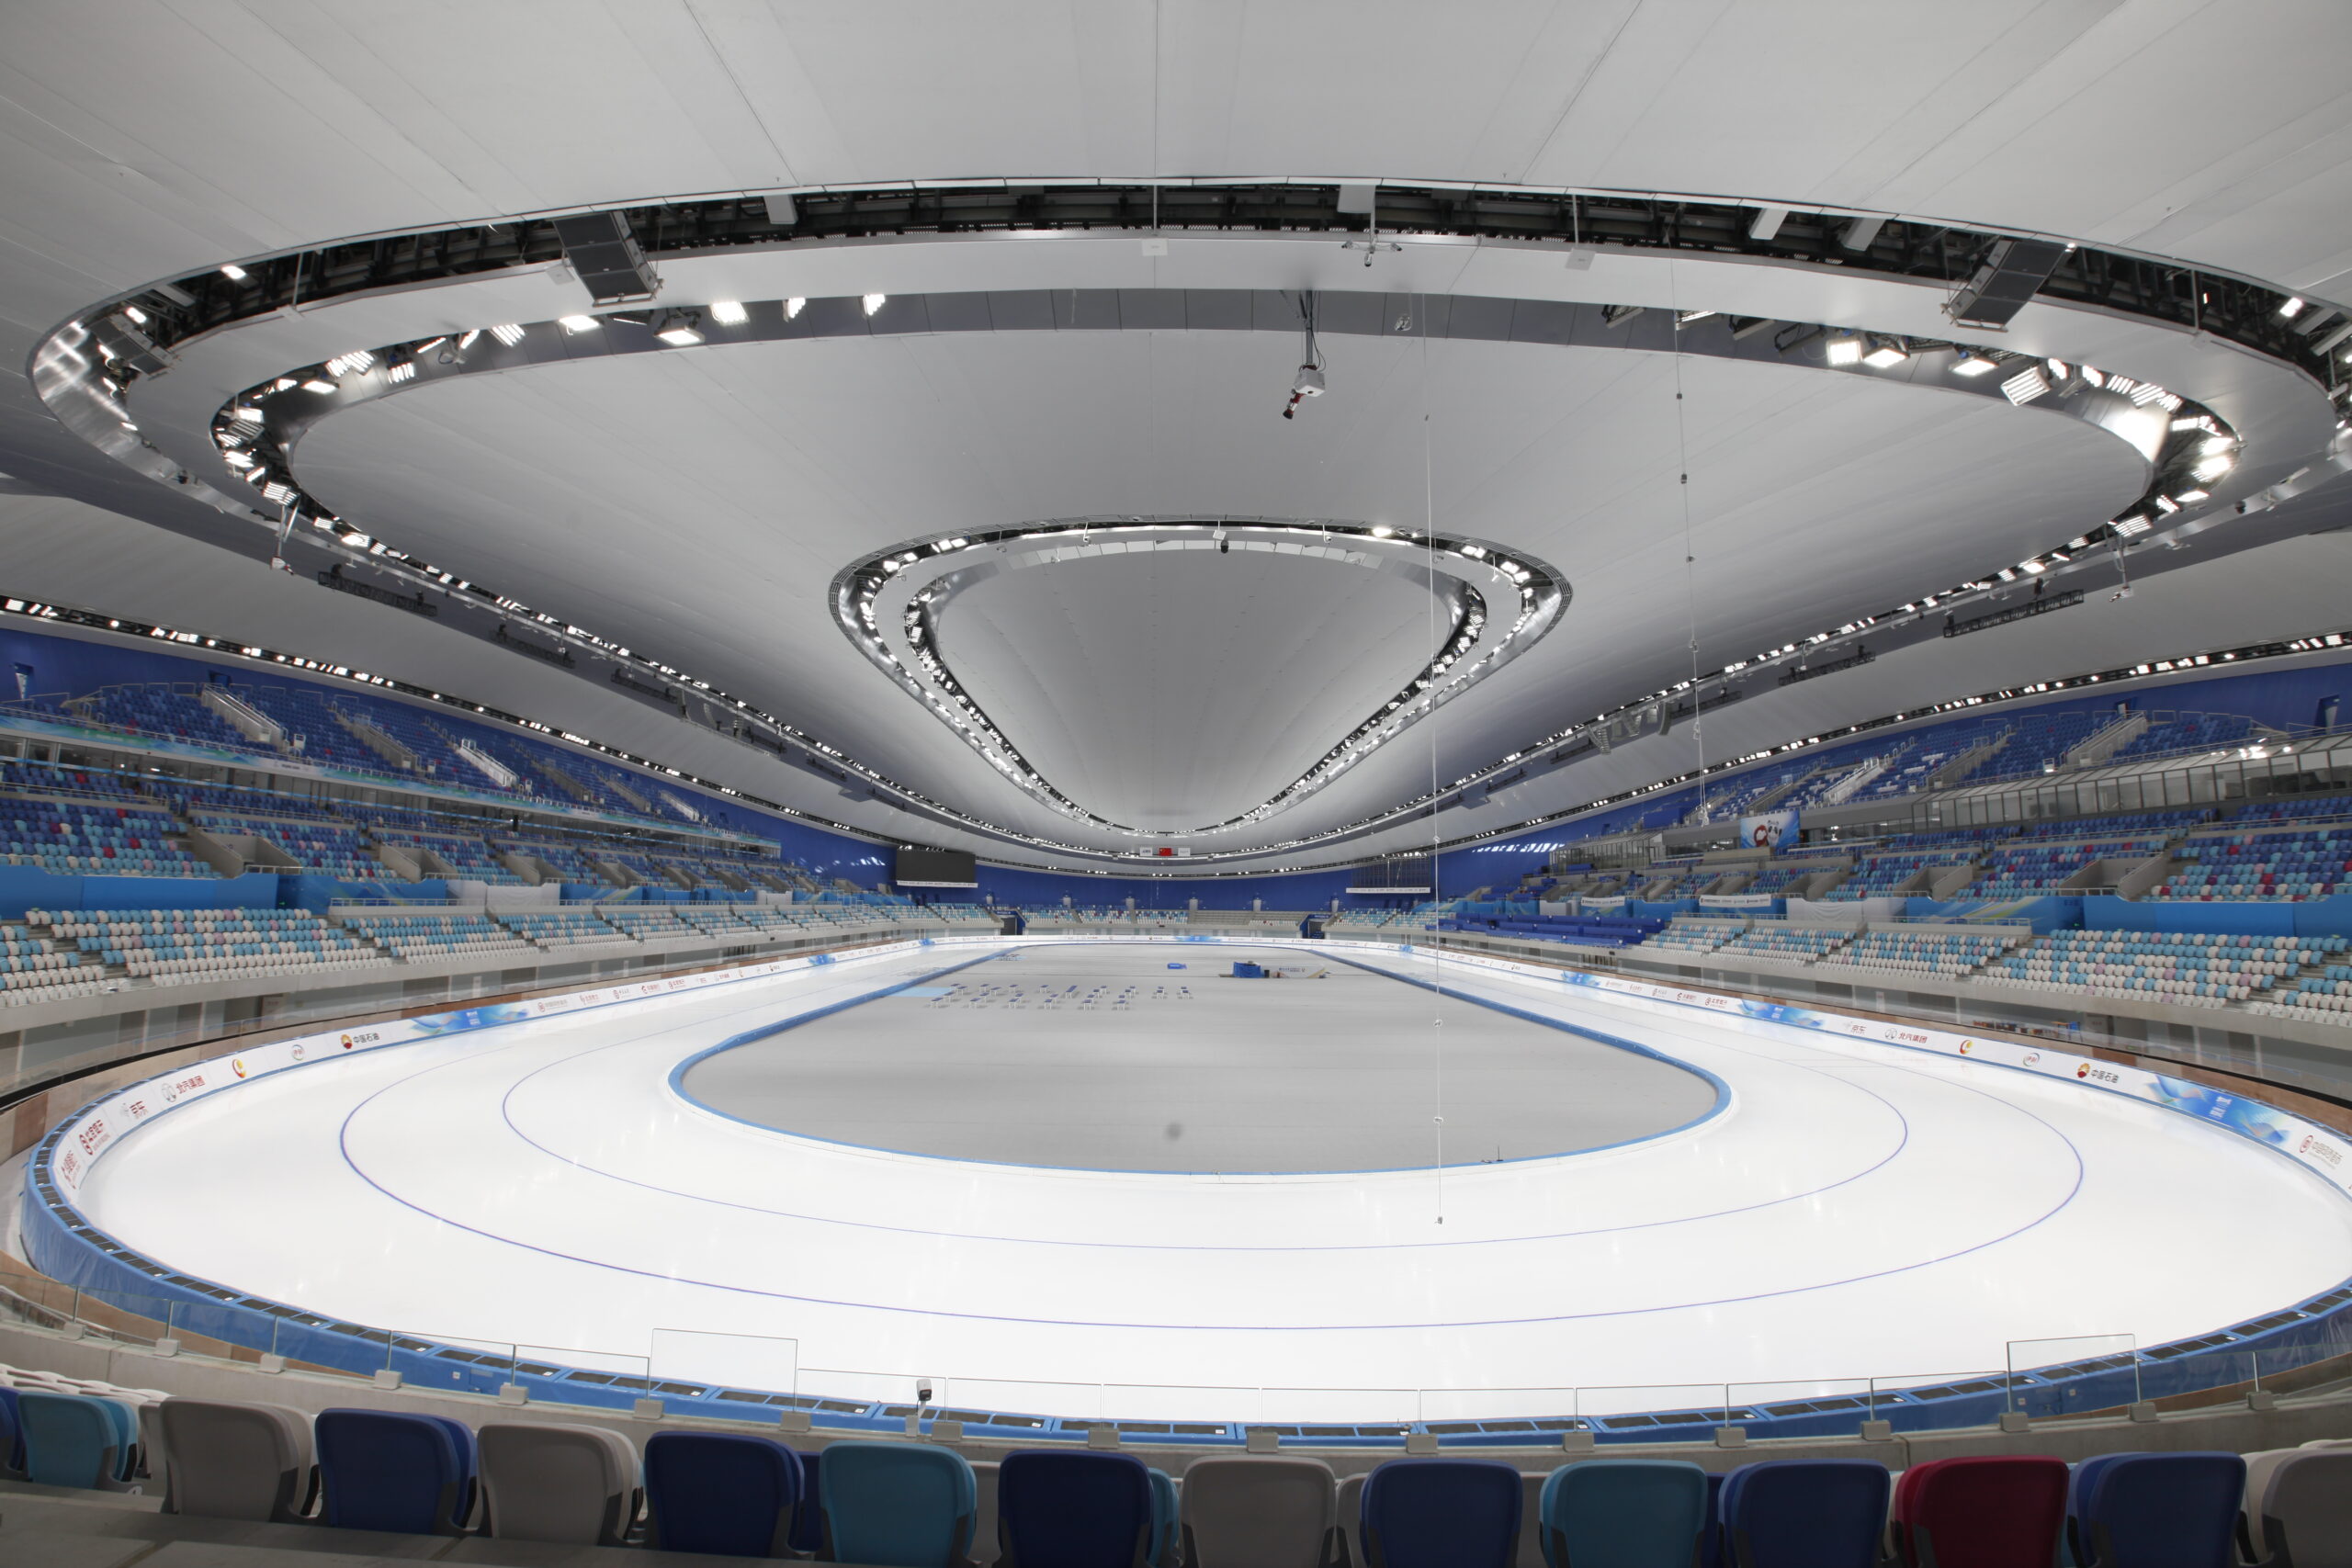 A view of the inside of the National Speed Skating Oval, showcasing the speed skating tracks, bleachers, and distinctive ceiling